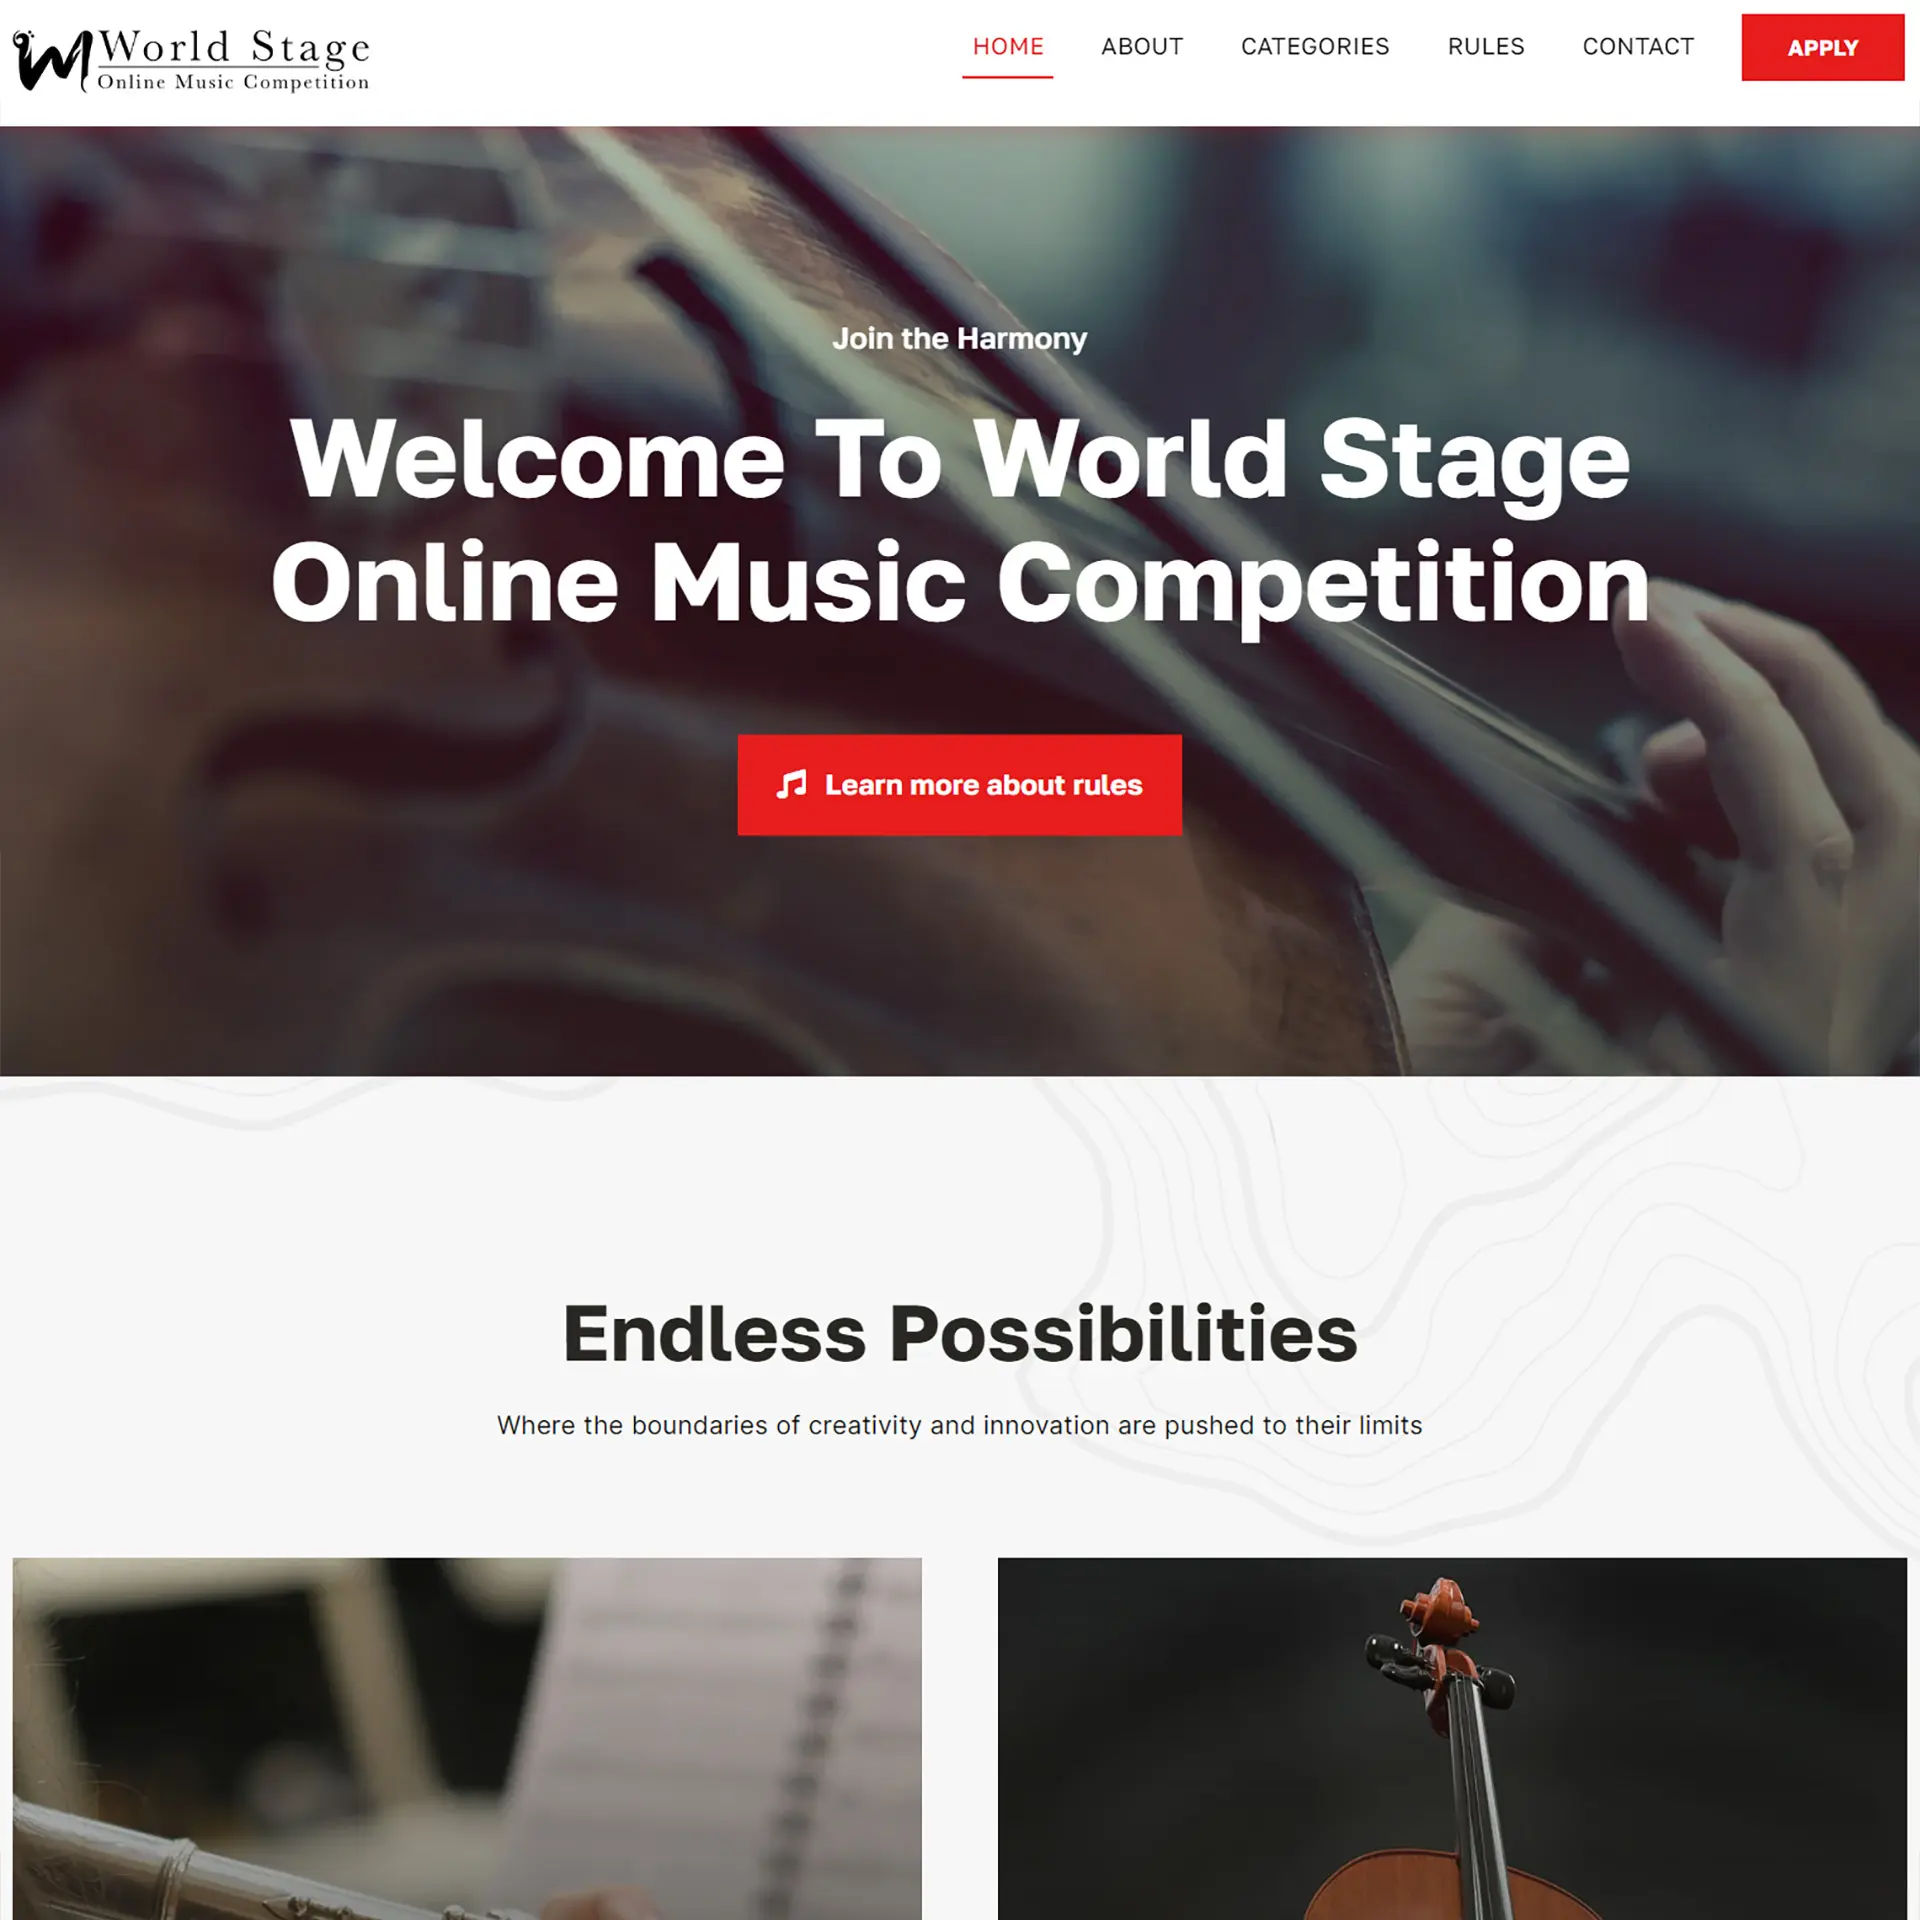 World Stage Online Music Competition